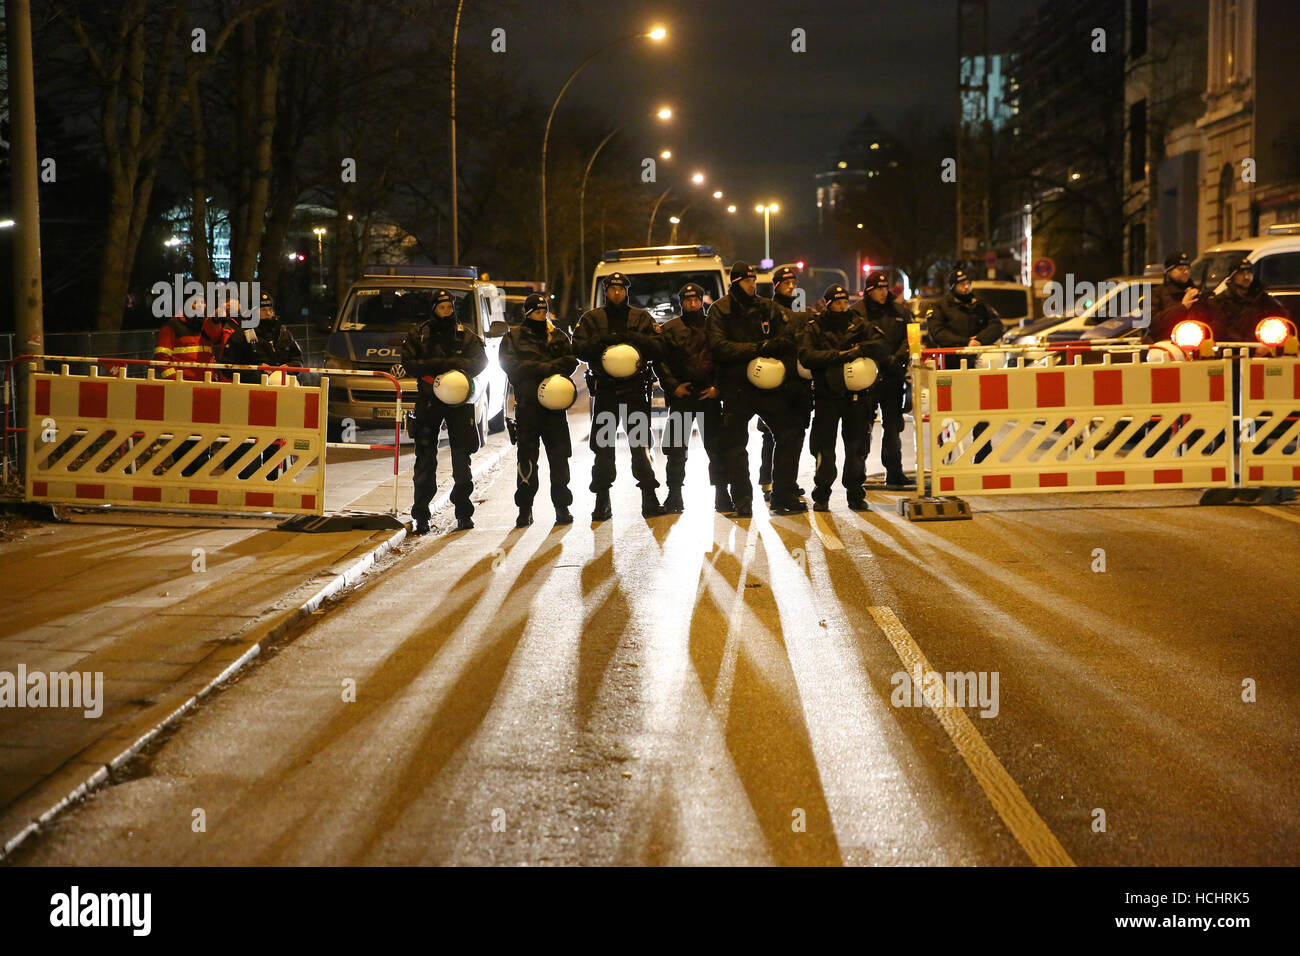 Hamburg, Germany. 8th Dec, 2016. Policemen block a road towards the fair grounds during a demonstration of left-wing groups against the OSCE Ministerial Council Meeting in Hamburg, Germany, 8 December 2016. The conference of the Organization for Security and Co-Operation in Europe (OSCE) takes place at the fair halls in Hamburg on 8 and 9 December. Photo: Bodo Marks/dpa/Alamy Live News Stock Photo